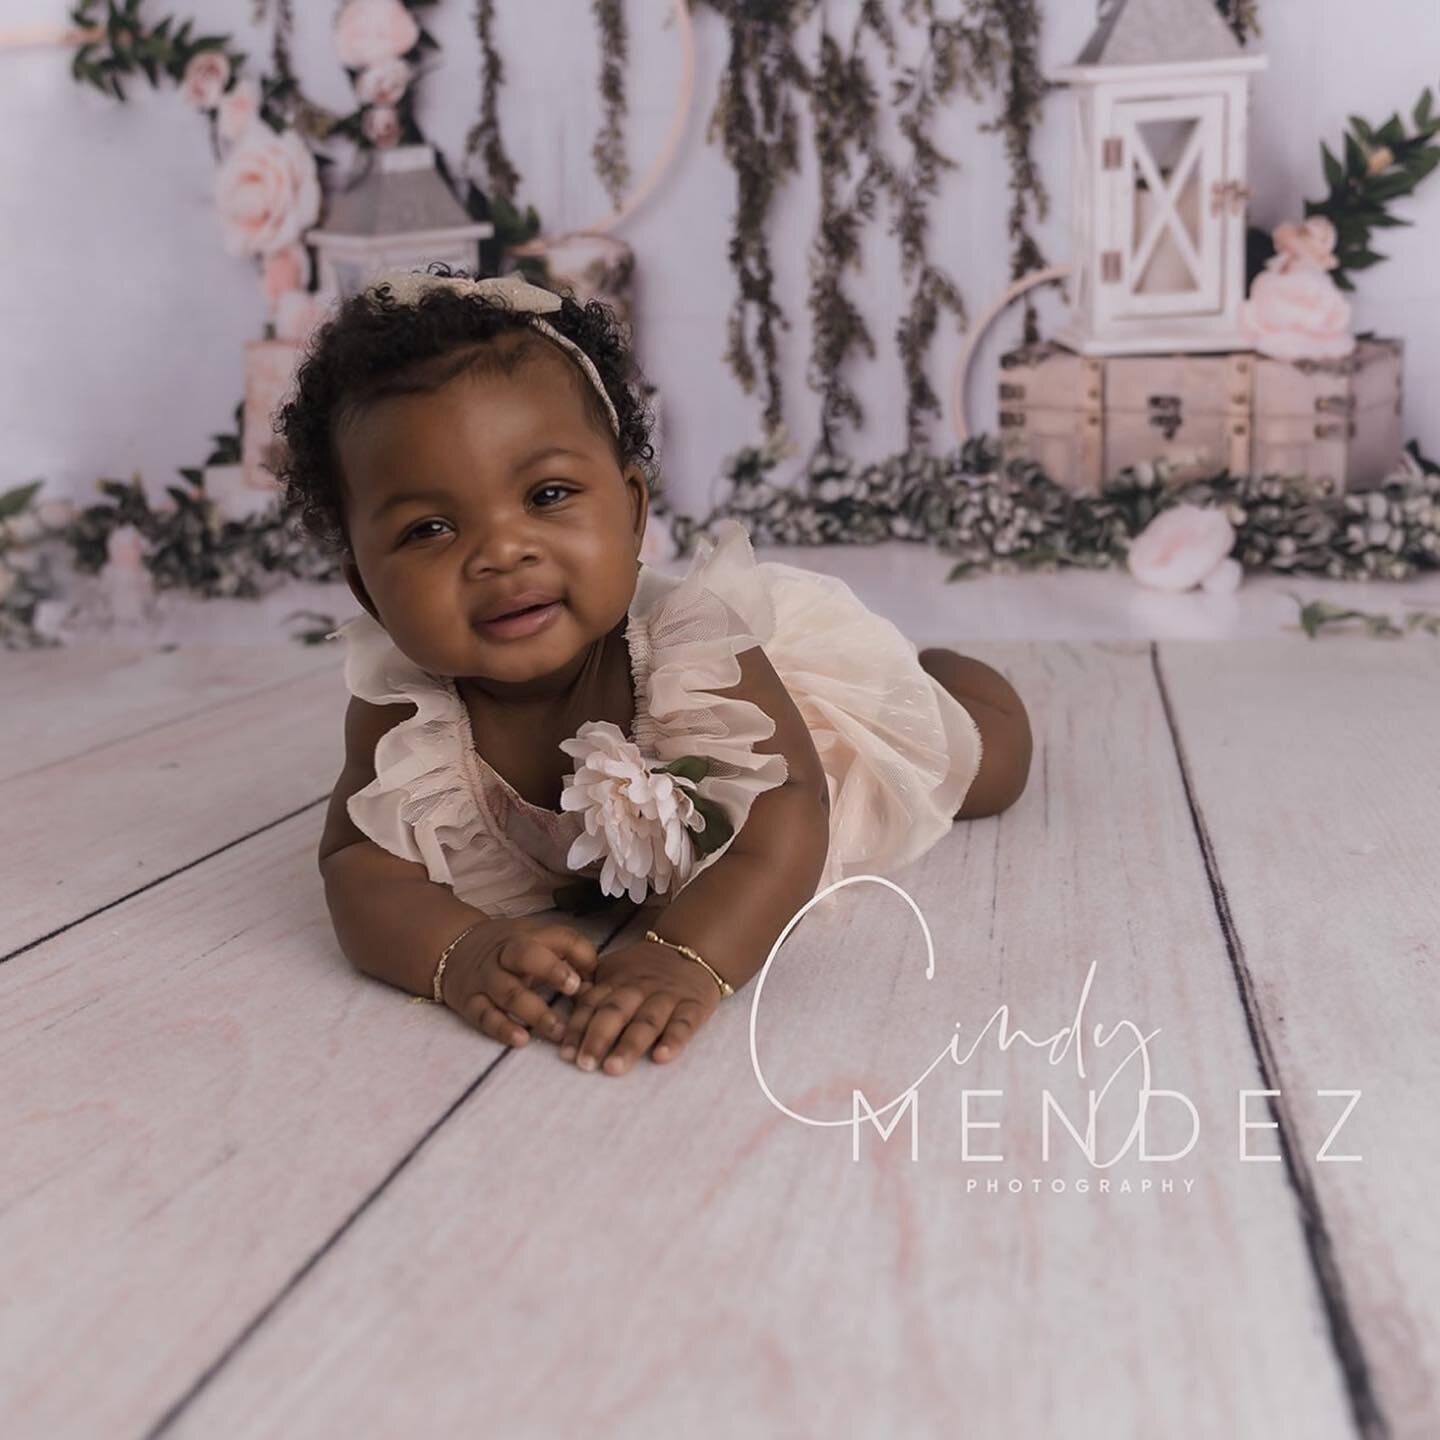 I could literally eat this cutie up!! All the yumminess gahhh look at those cheeks!!! #milestone #6months #babygirl #beautiful #girl #cheeks #infant #childrenphotographer #rhodeislandphotographer #cindymendezphotography